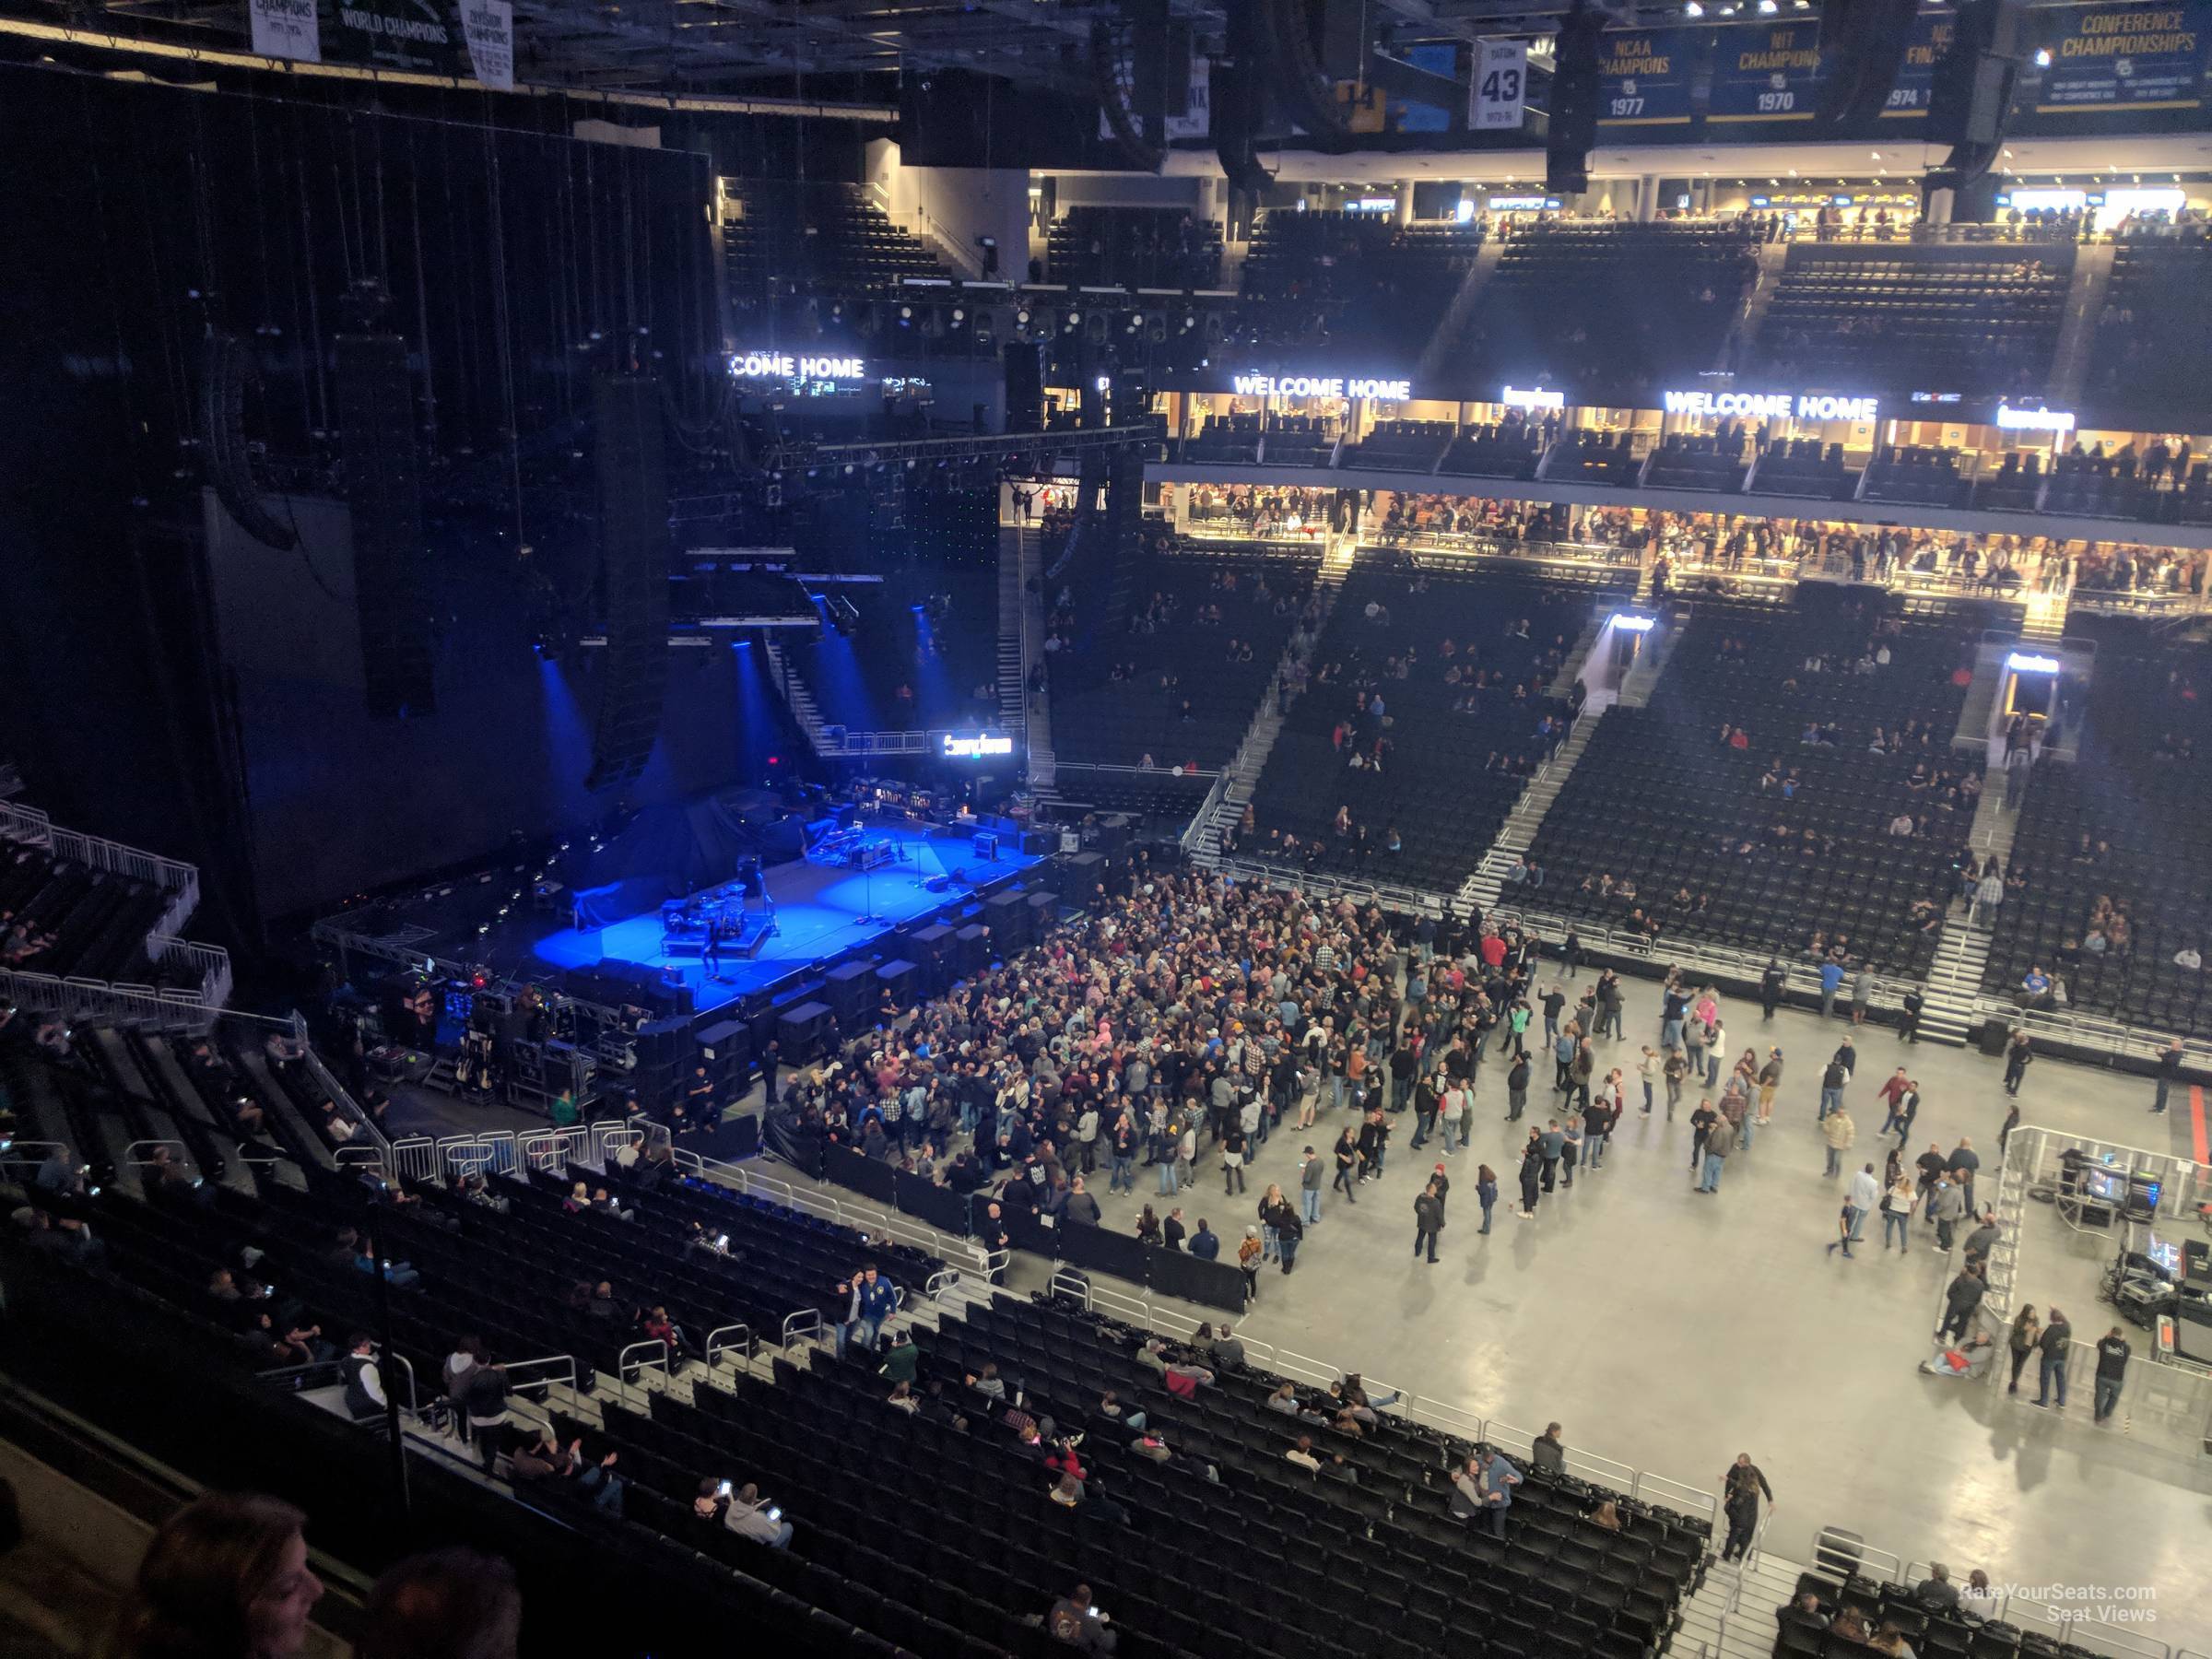 section 207, row 3 seat view  for concert - fiserv forum